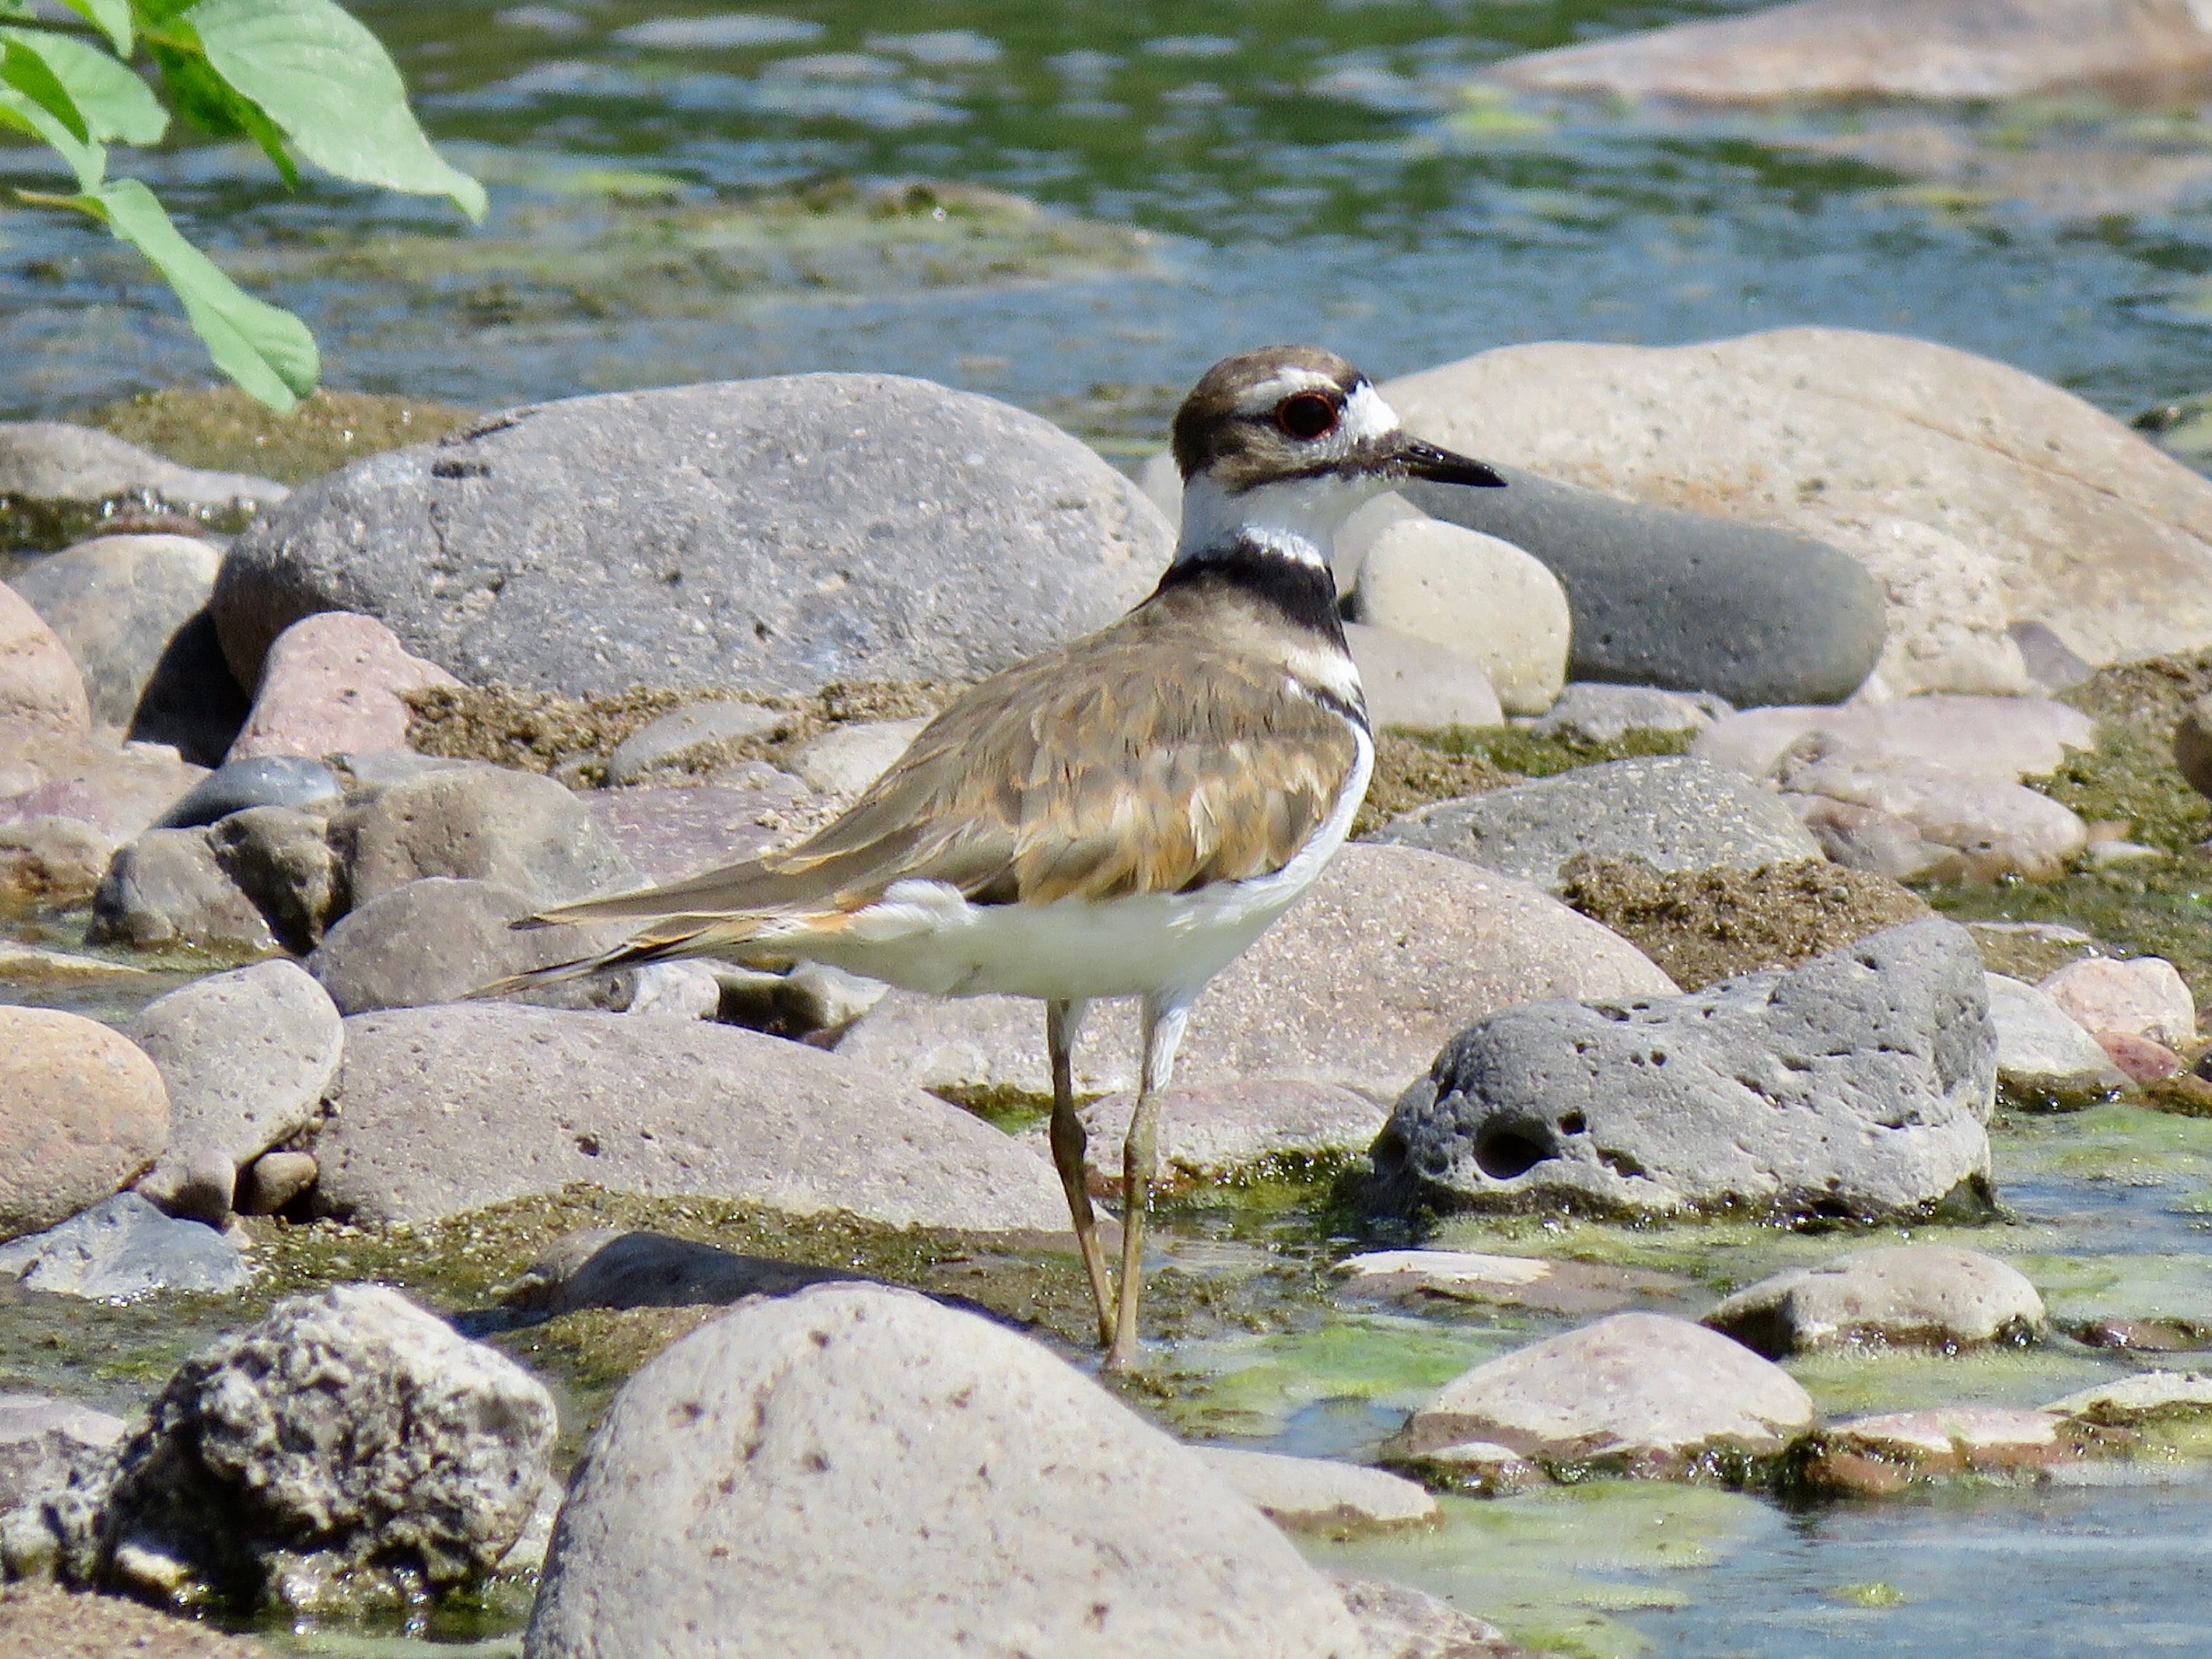 A killdeer forages in the Santa Cruz River in Tucson in August 2019. Many birds have gravitated to the river since Tucson Water began releasing treated effluent near downtown over the past two year.